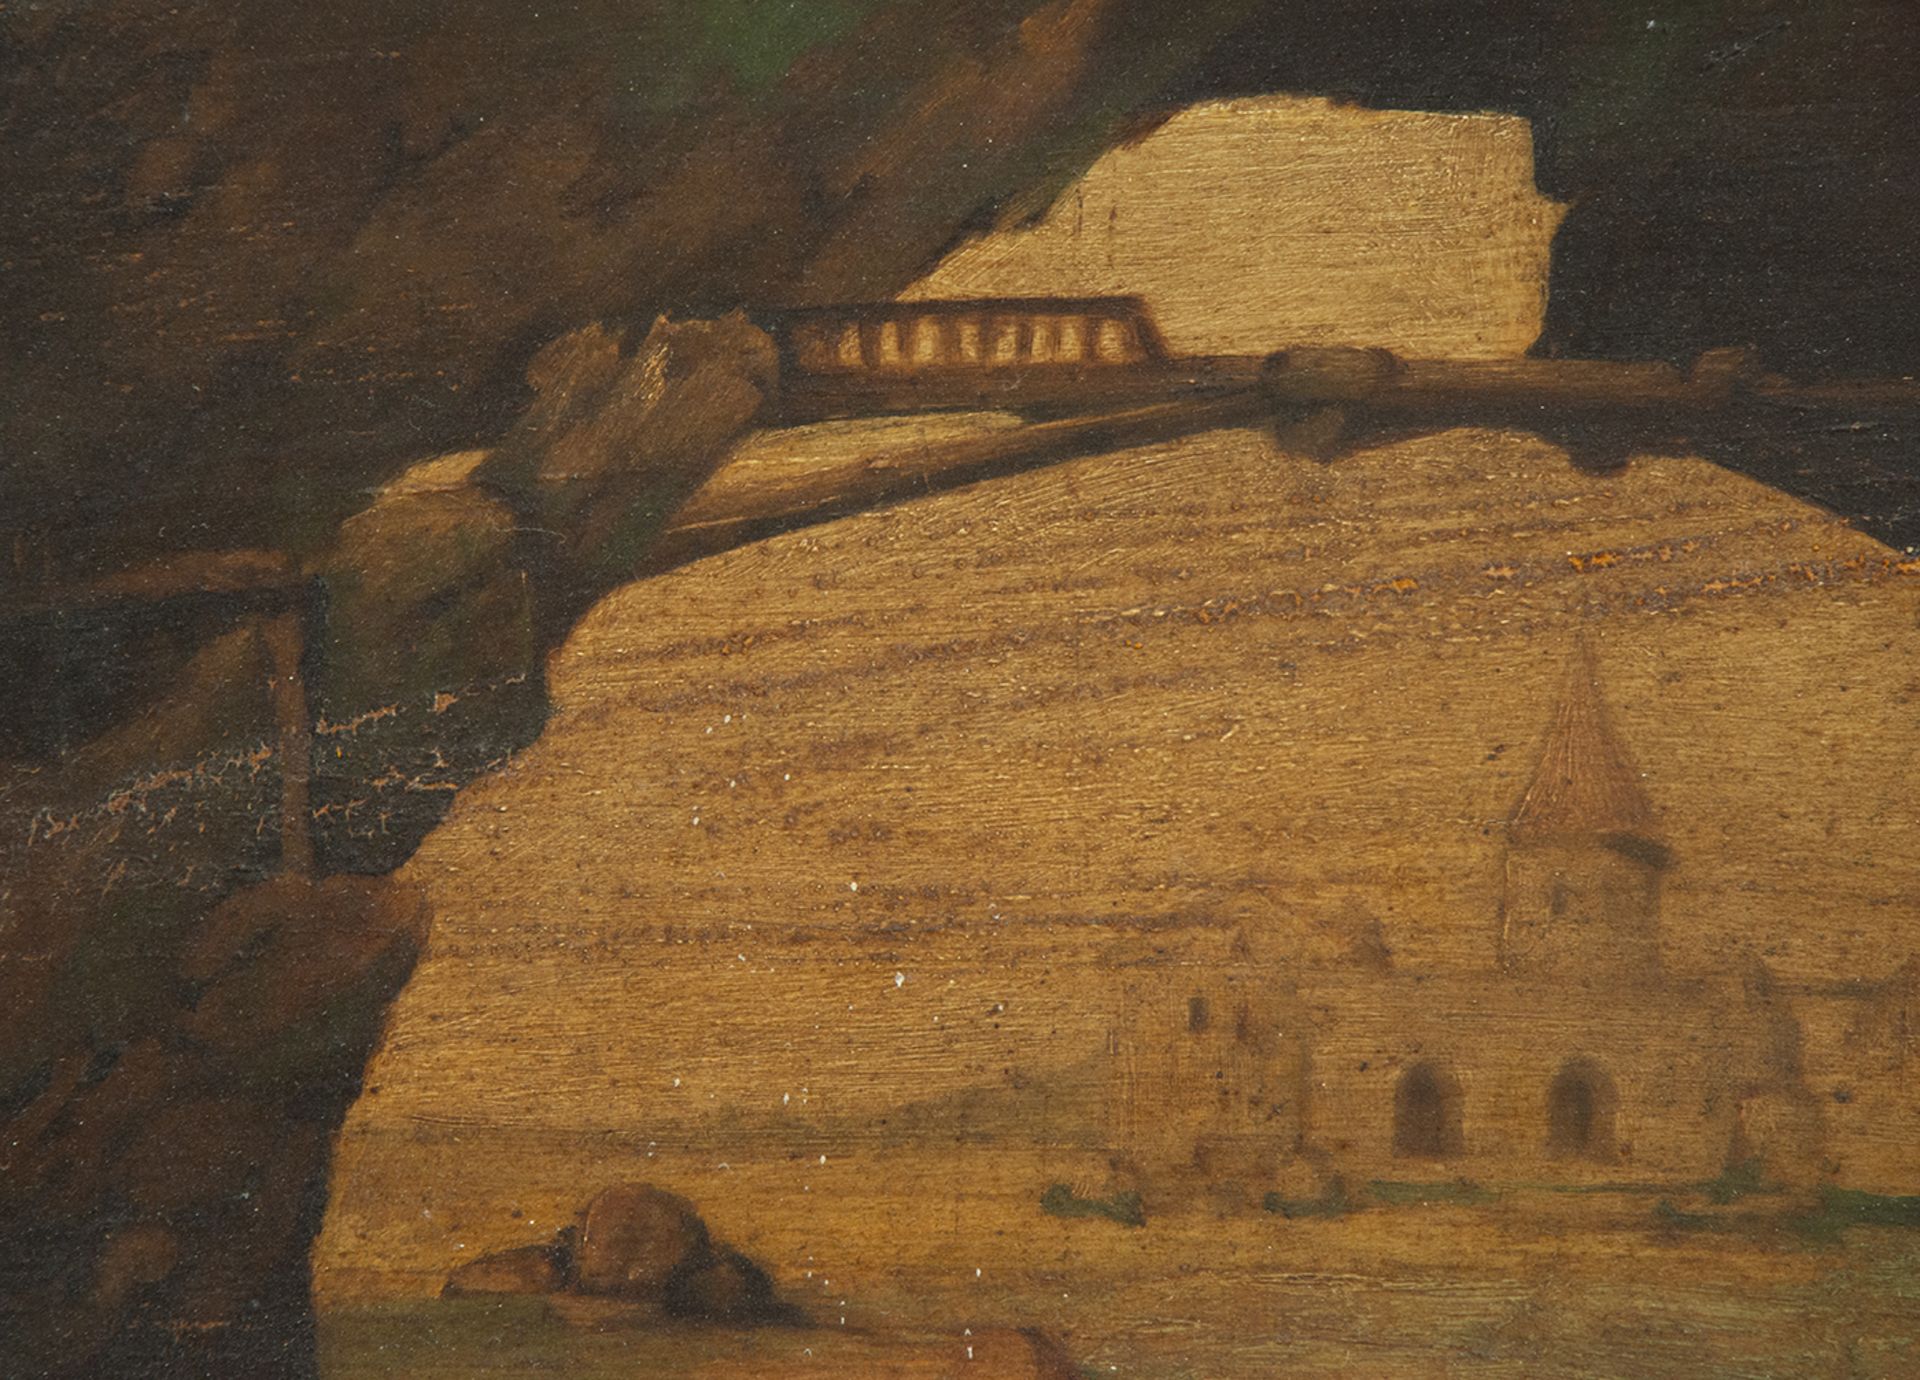 Pair of Landscapes with Whimsies, 19th century, Italy - Image 3 of 7